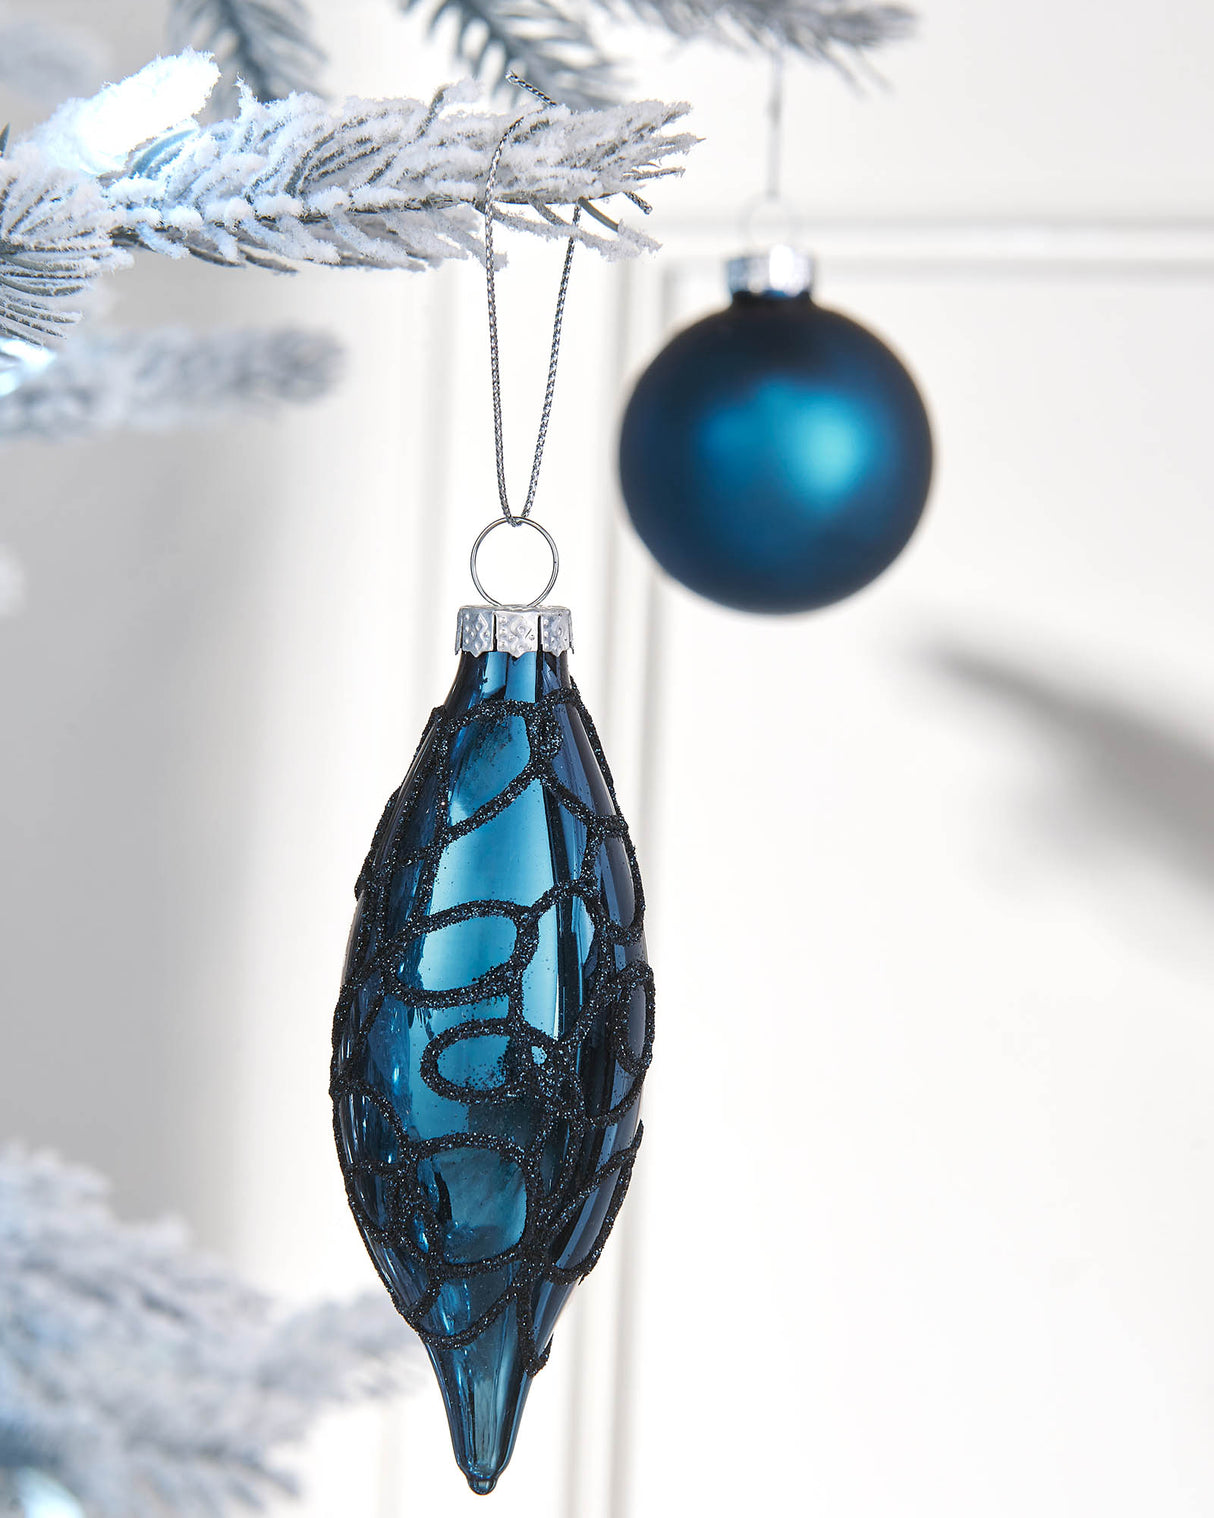 Navy Blue Glass Baubles, 20 Pack